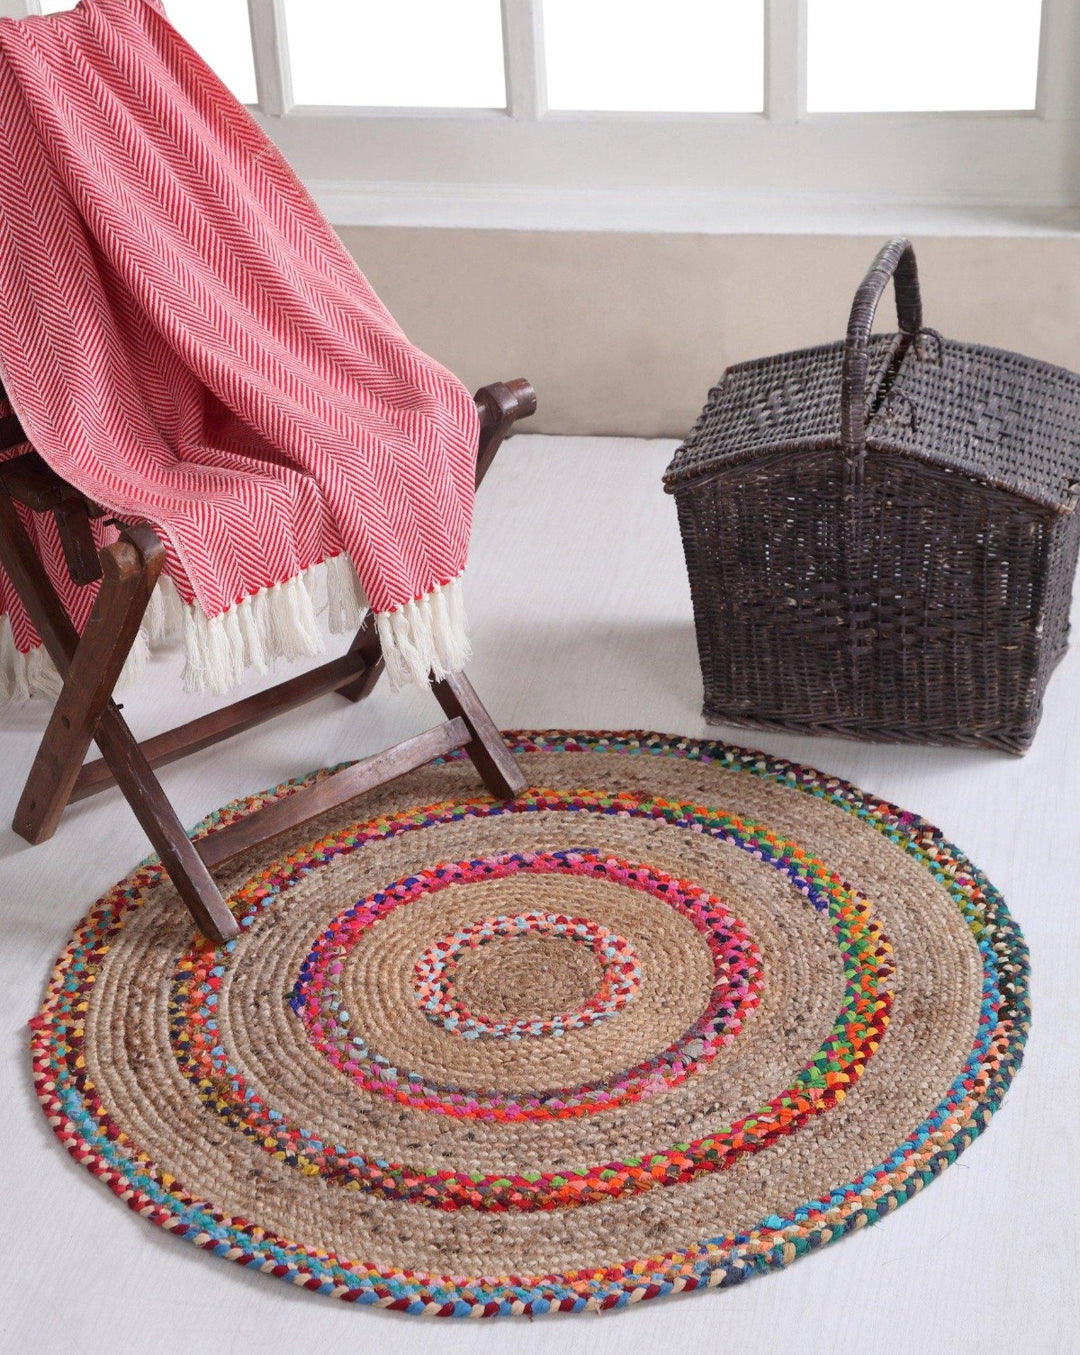 FIESTA Round Rug Jute Hand Woven with Recycled Fabric - Second Nature Online